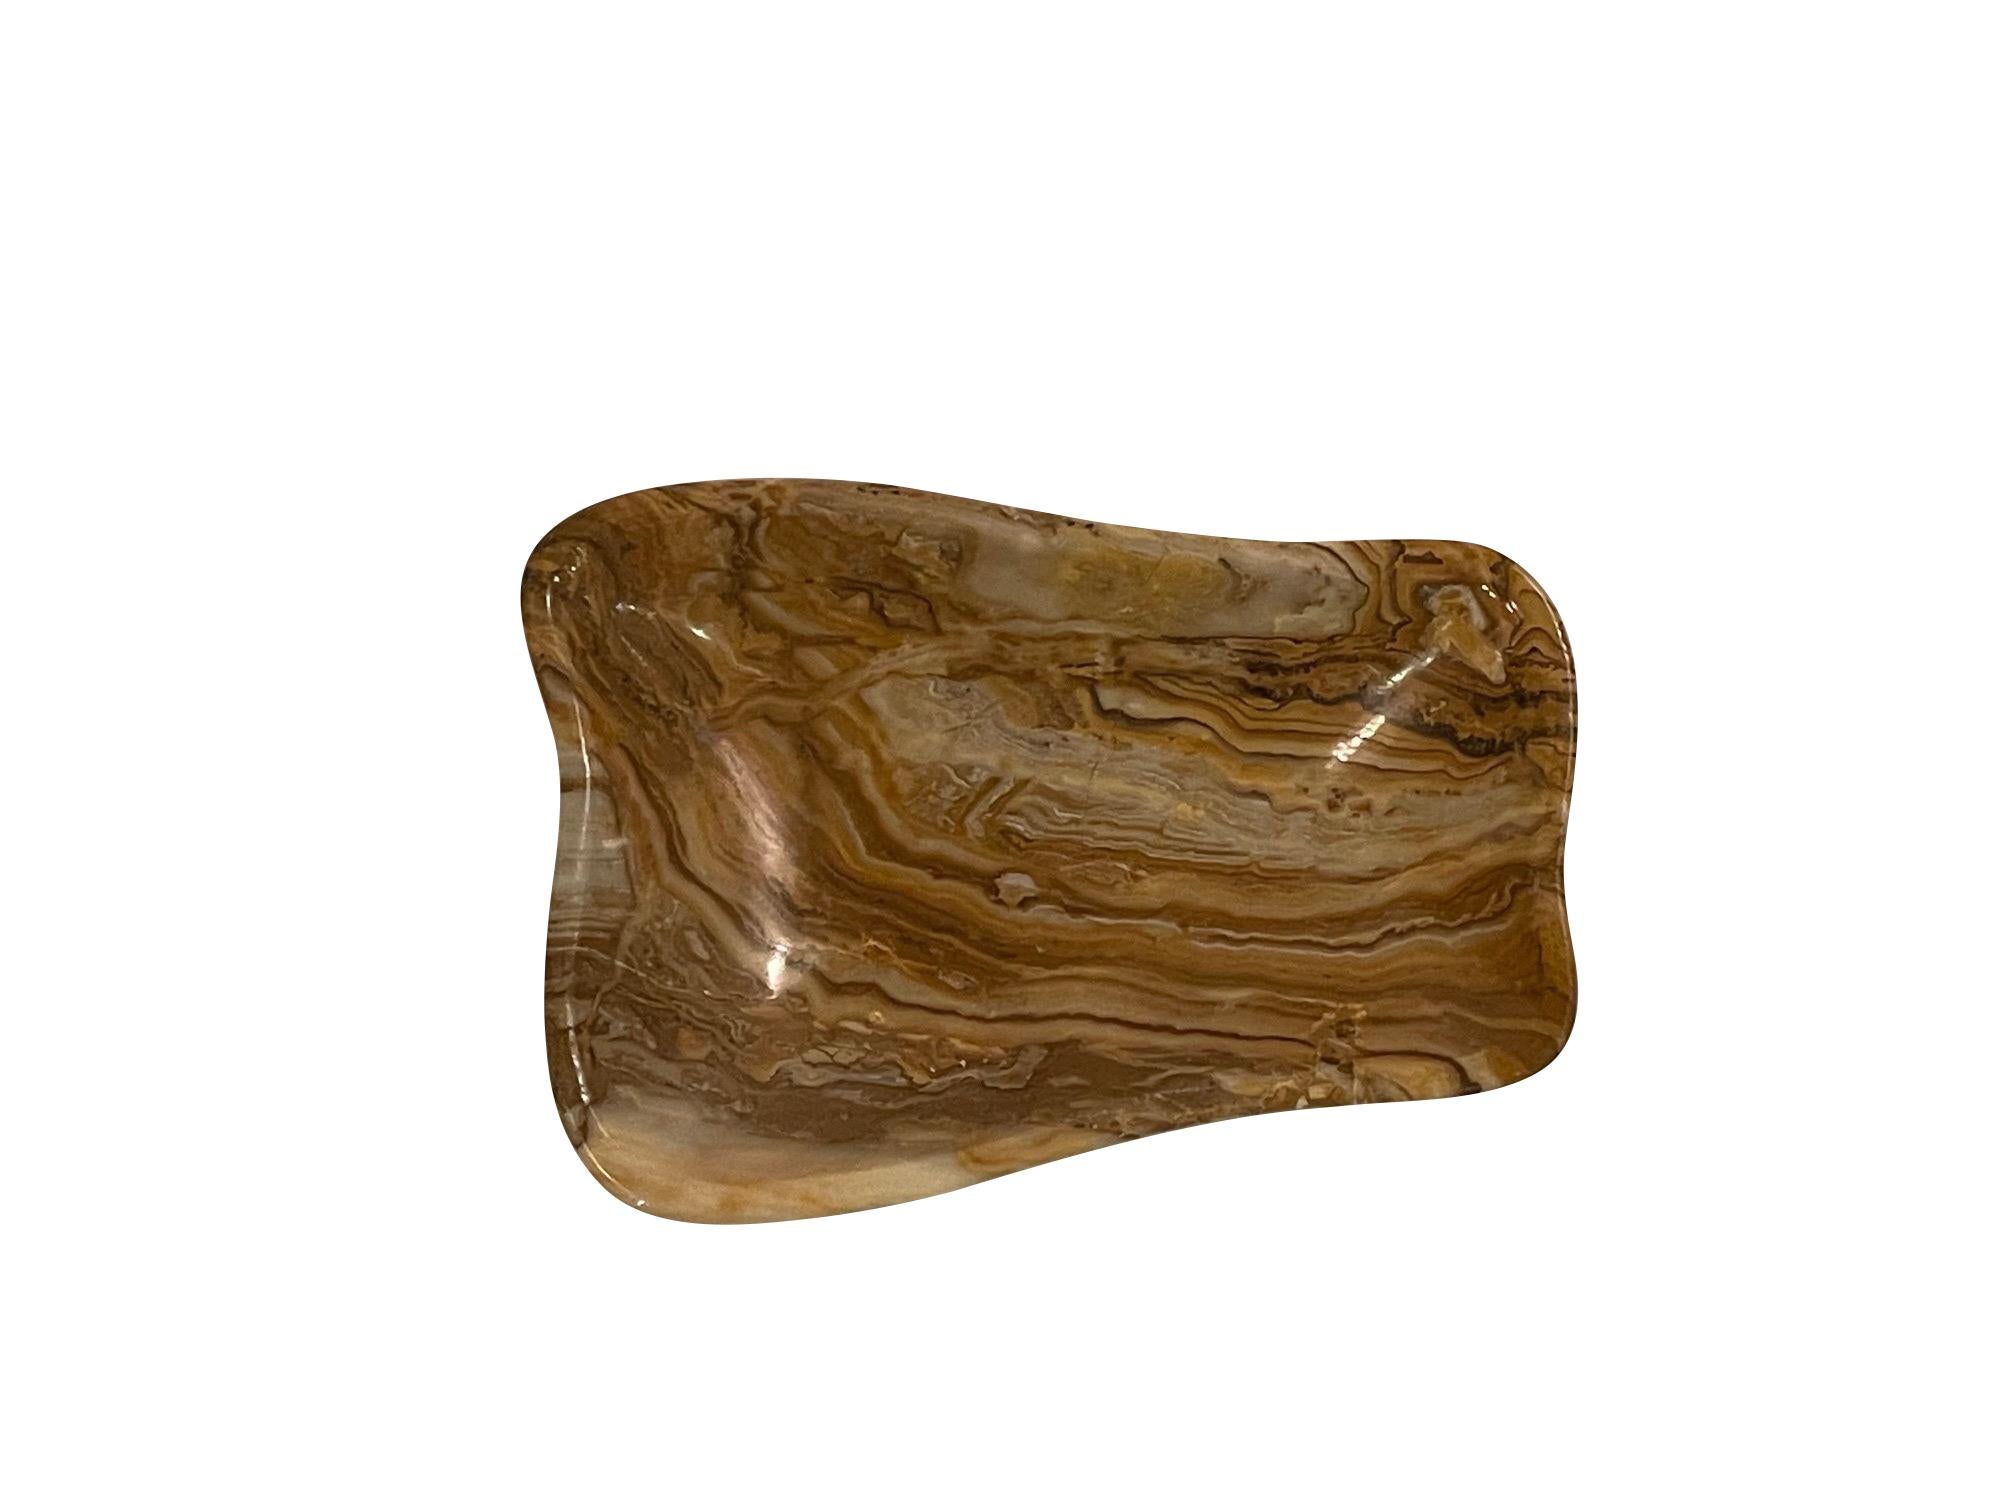 Contemporary Moroccan onyx bowl.
Free form shape.
Shades of striated horizontal gold lines.
Smooth polished finish.
From a large collection.